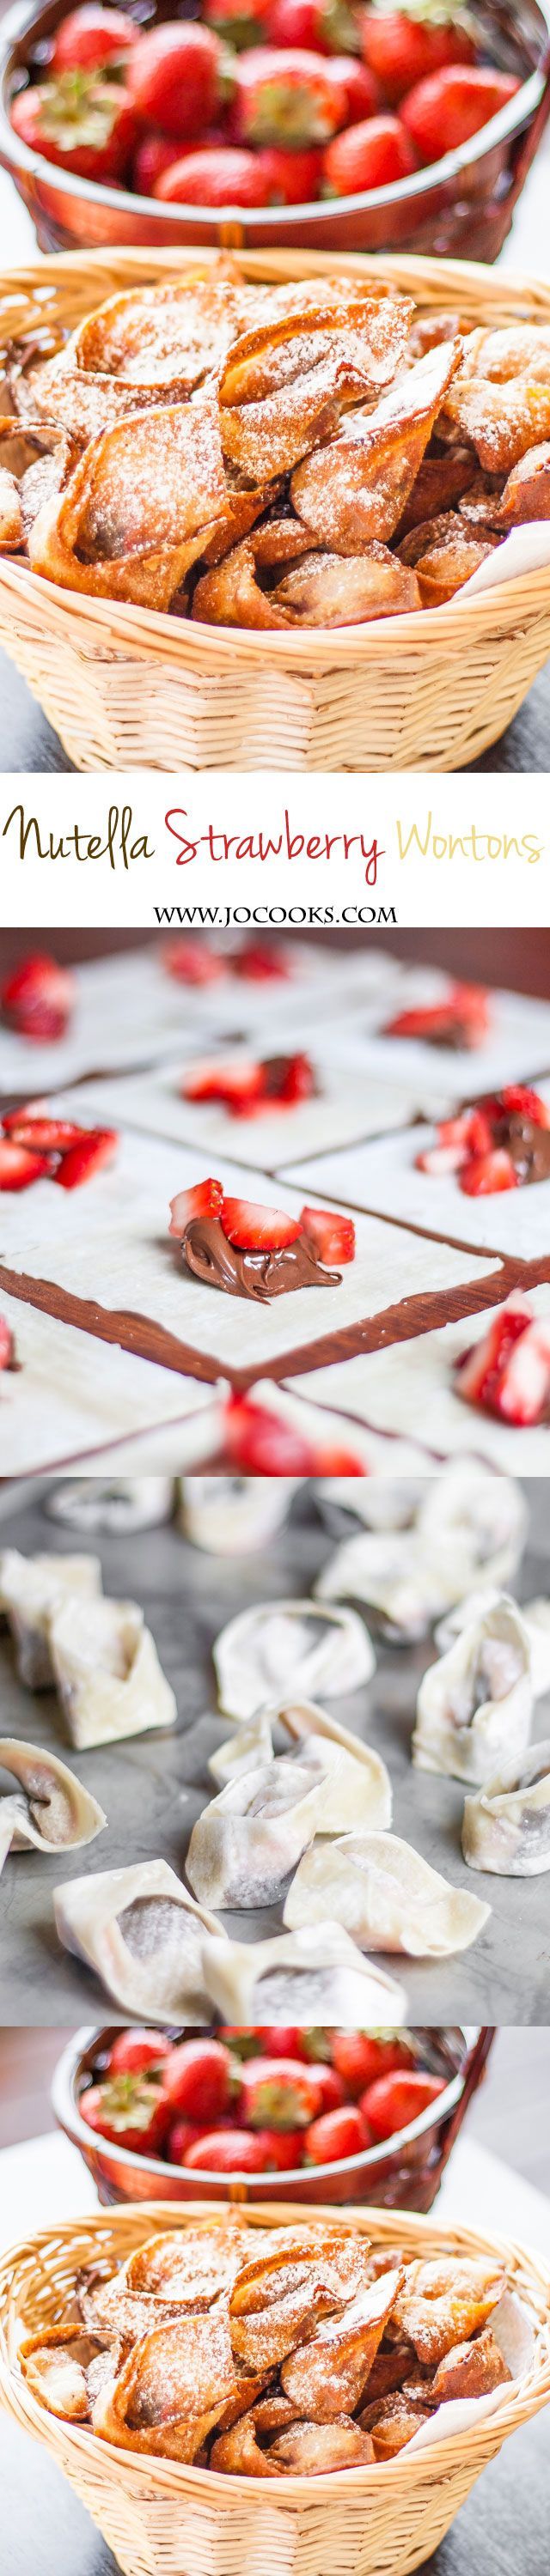 Nutella and Strawberry Wontons – fresh strawberries and nutella paired together in a little wonton wrapper, then fried to perfection.